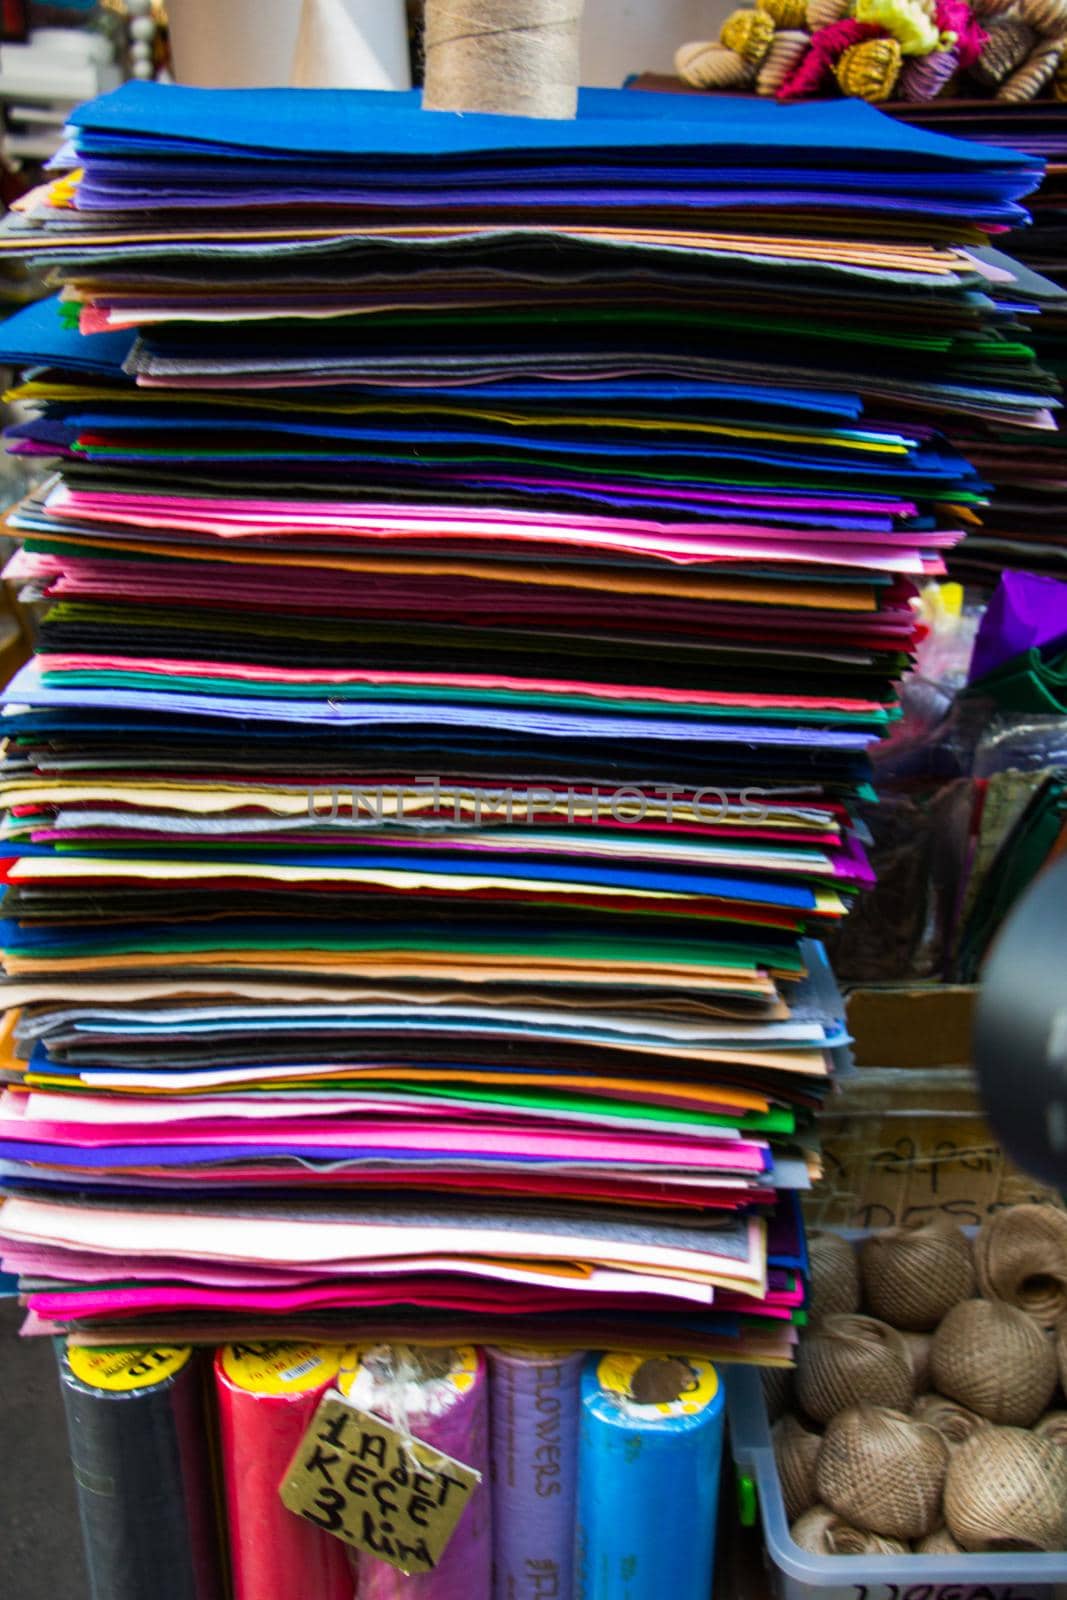 Colorful mats stacked on top of each other in display